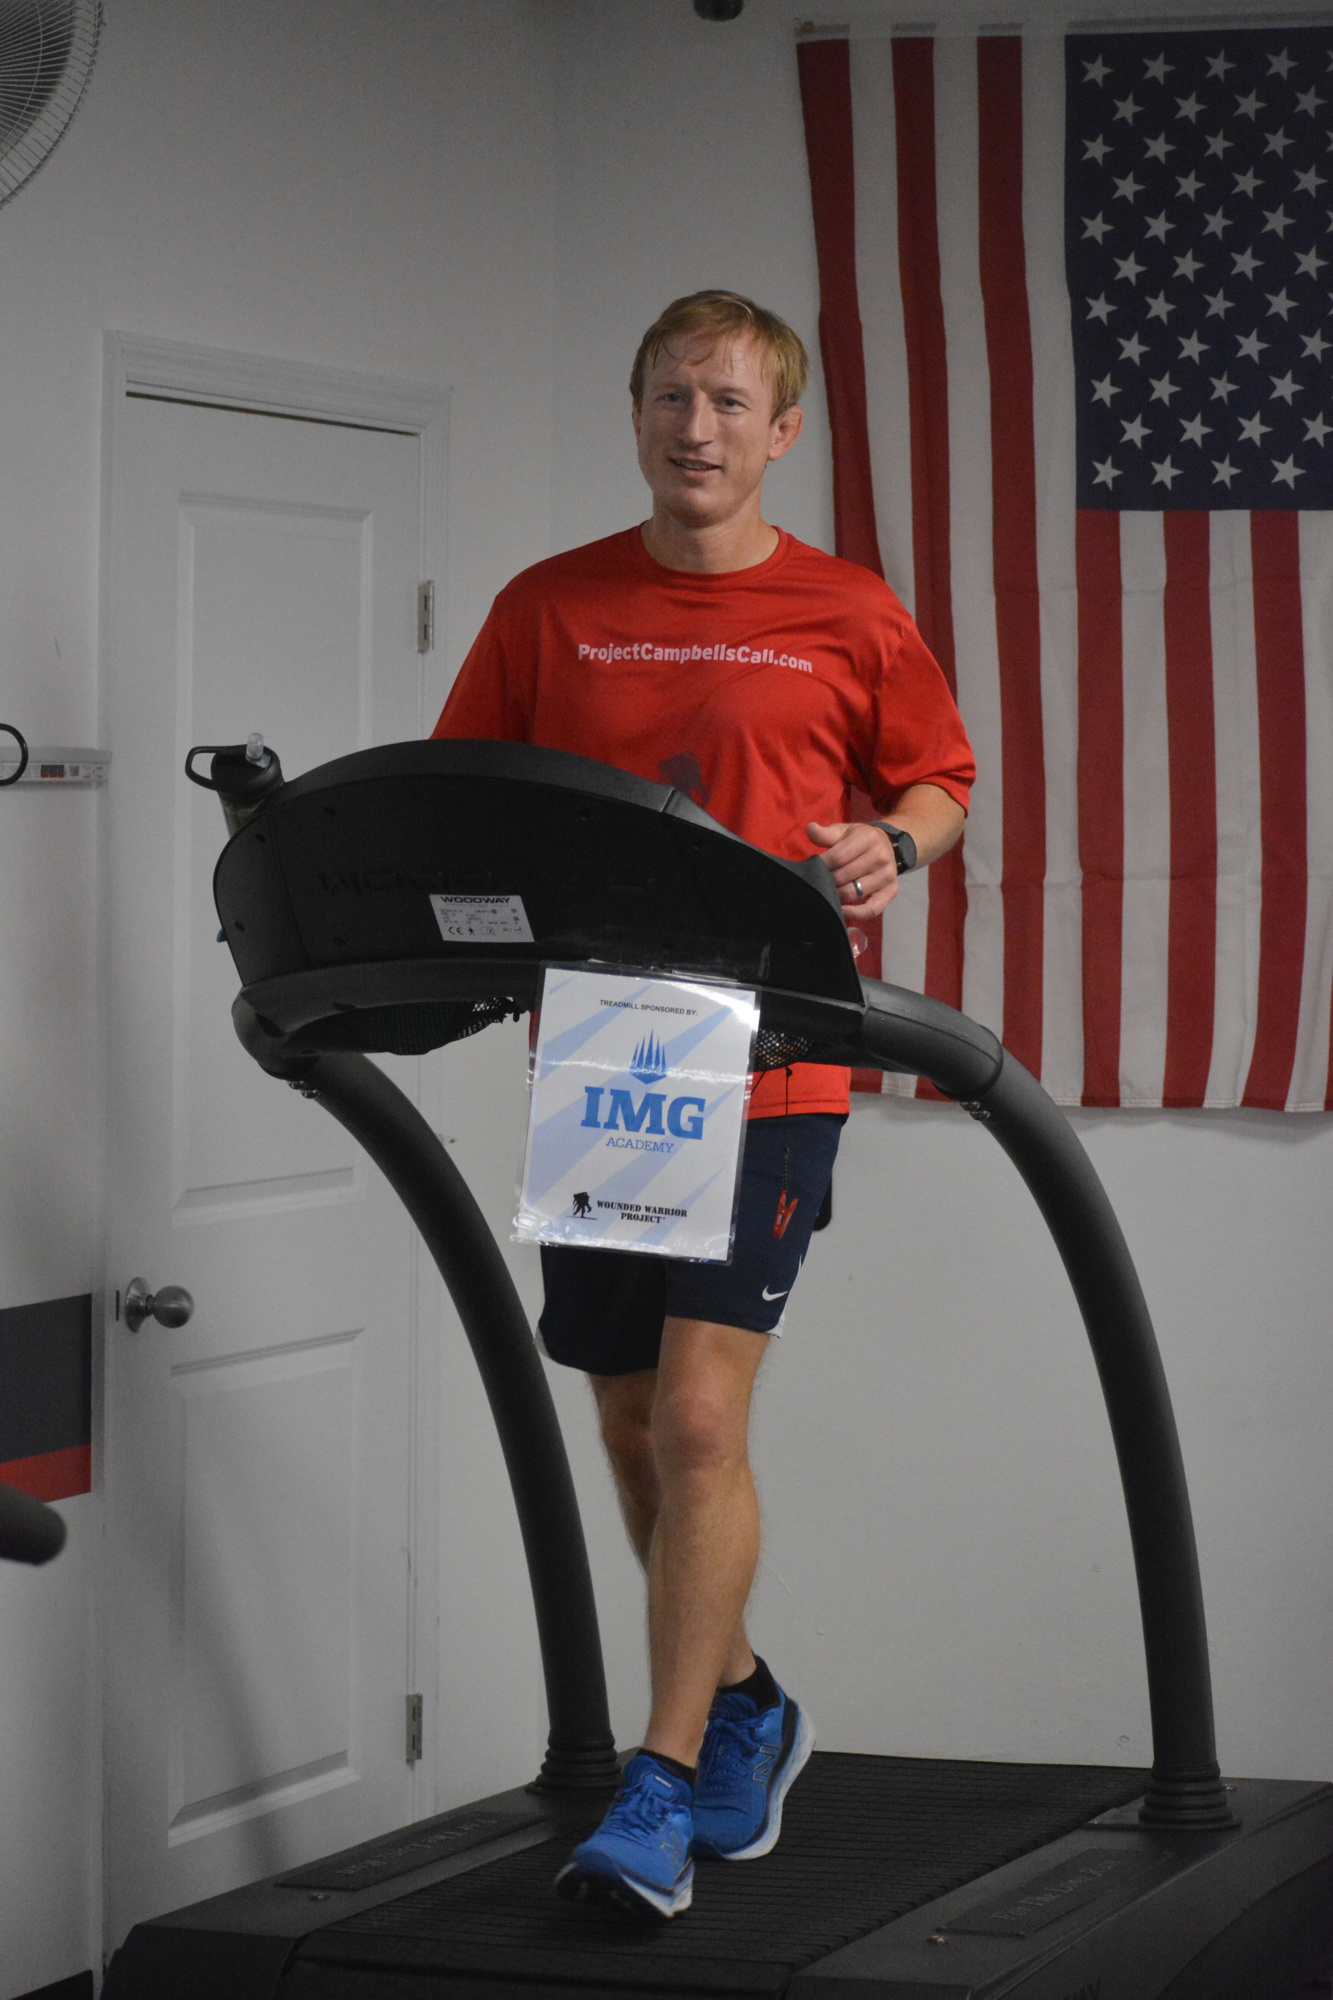 On Saturday, Nels Matson is running 14-straight hours on a treadmill at Sarasota's F45 gym as part of his training for a potential world-record run in August.